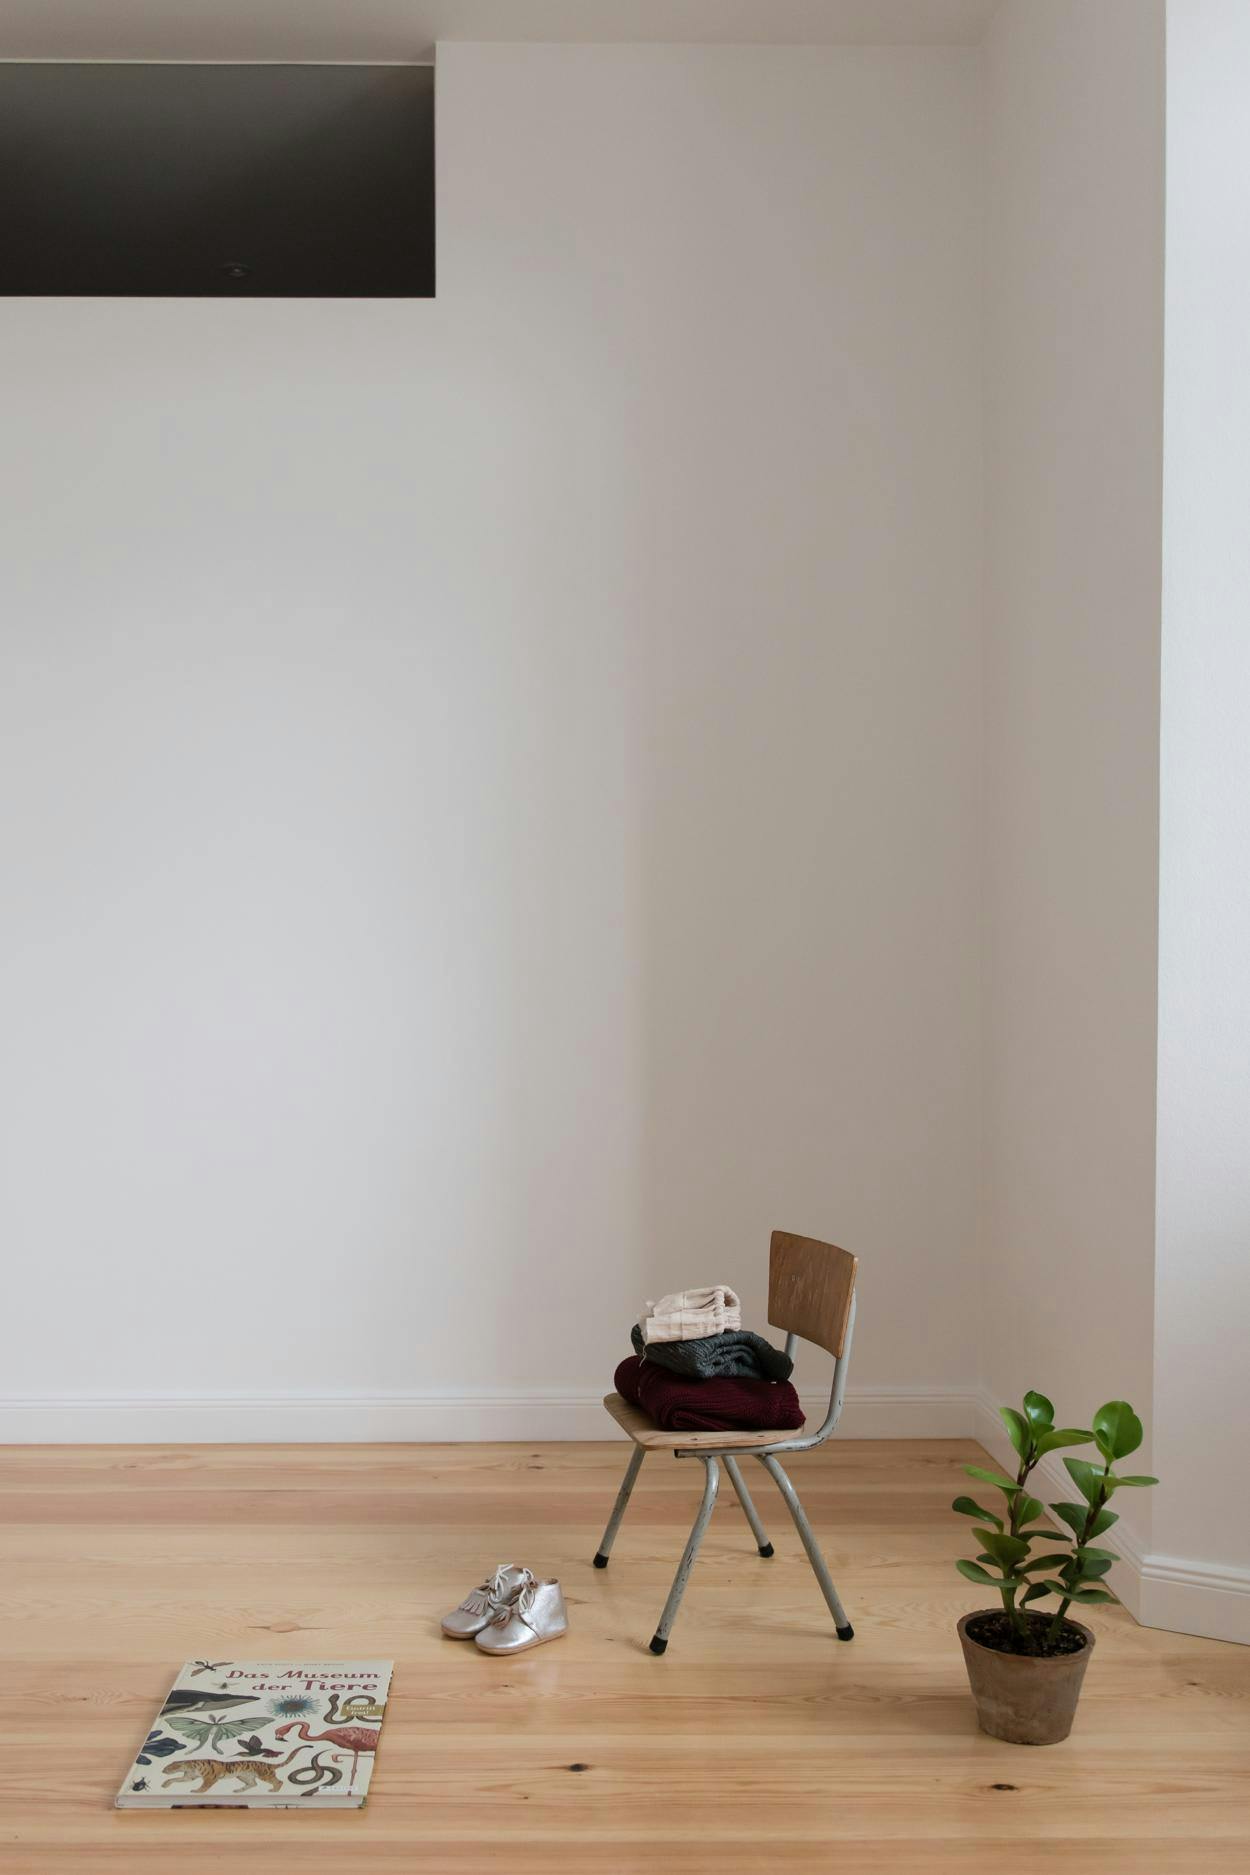 The image features a room with a white wall and a black TV mounted on the wall. In the room, there is a chair placed in front of the TV, and a potted plant is placed on the floor near the chair. The room appears to be empty, with no other furniture or objects visible.

There are two books placed on the floor, one closer to the left side of the room and the other towards the right side. Additionally, there is a remote control lying on the floor near the chair. The room seems to be a living space, possibly a bedroom or a study area.